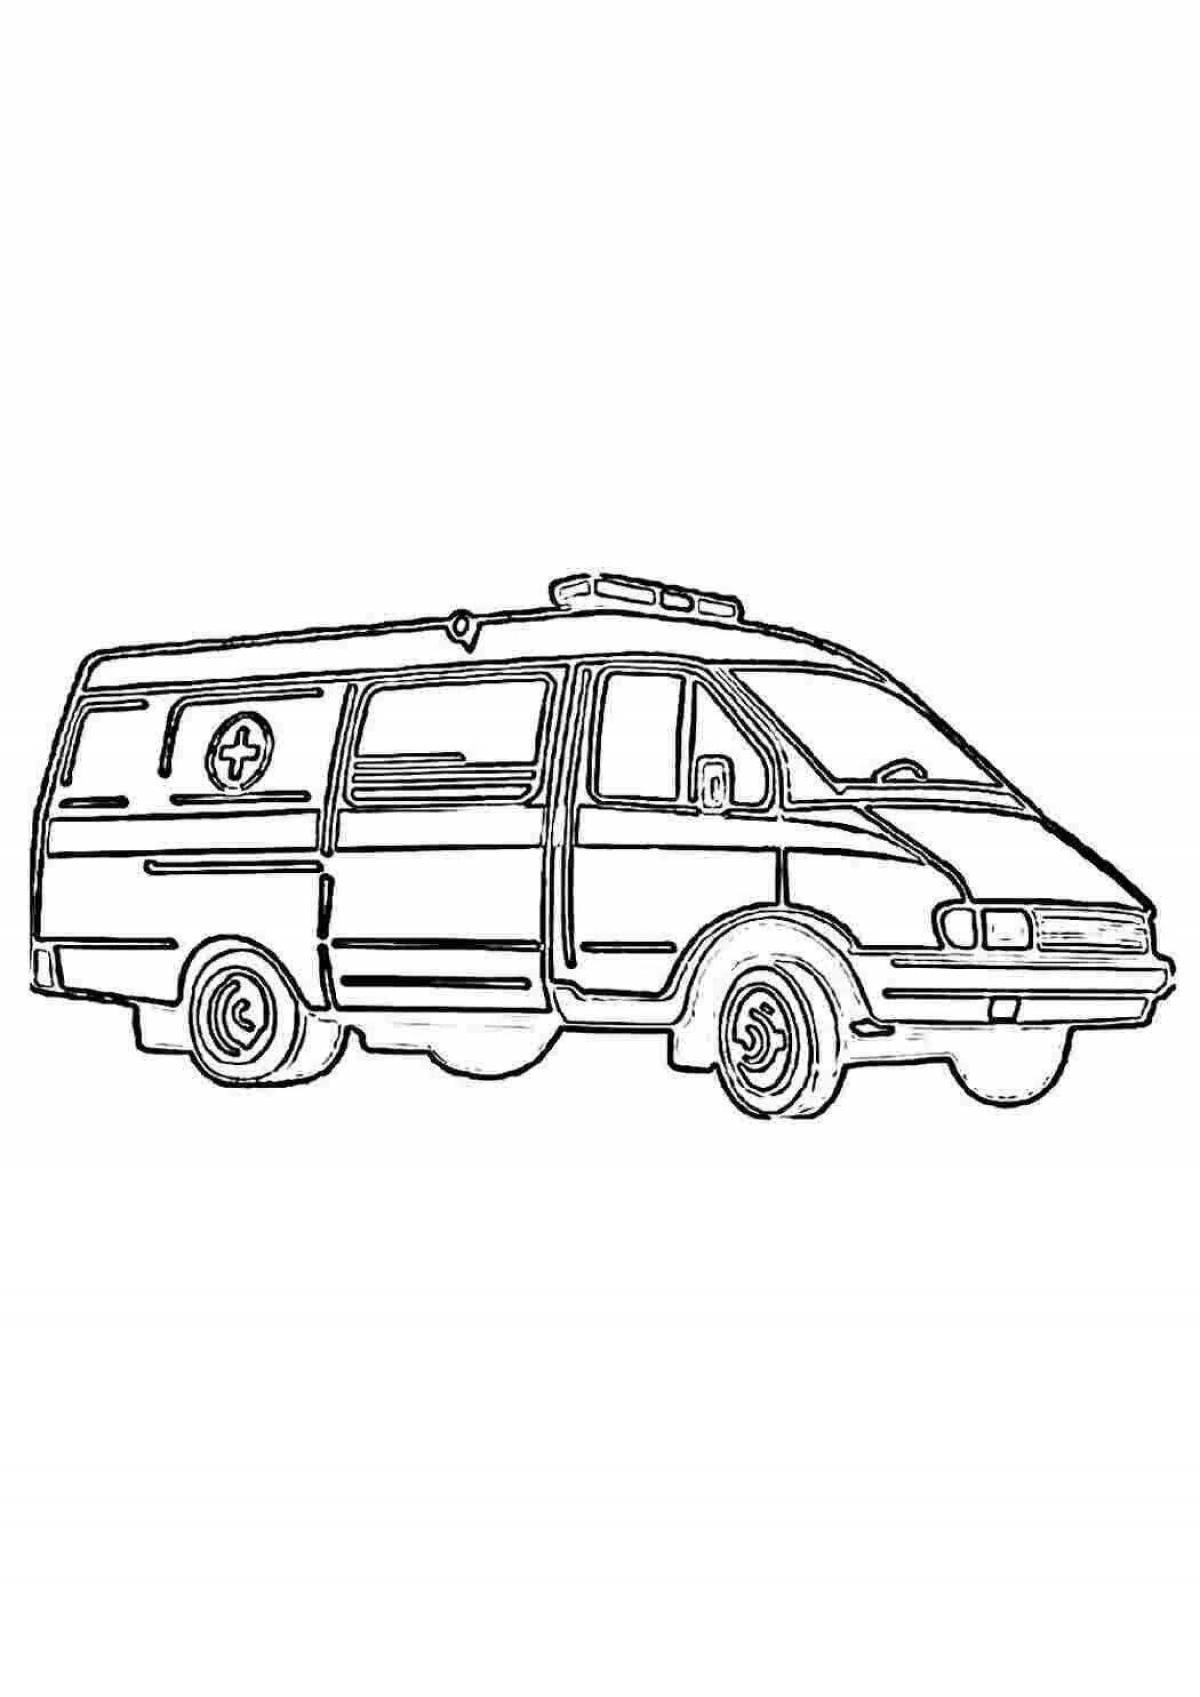 Tempting gas service coloring page